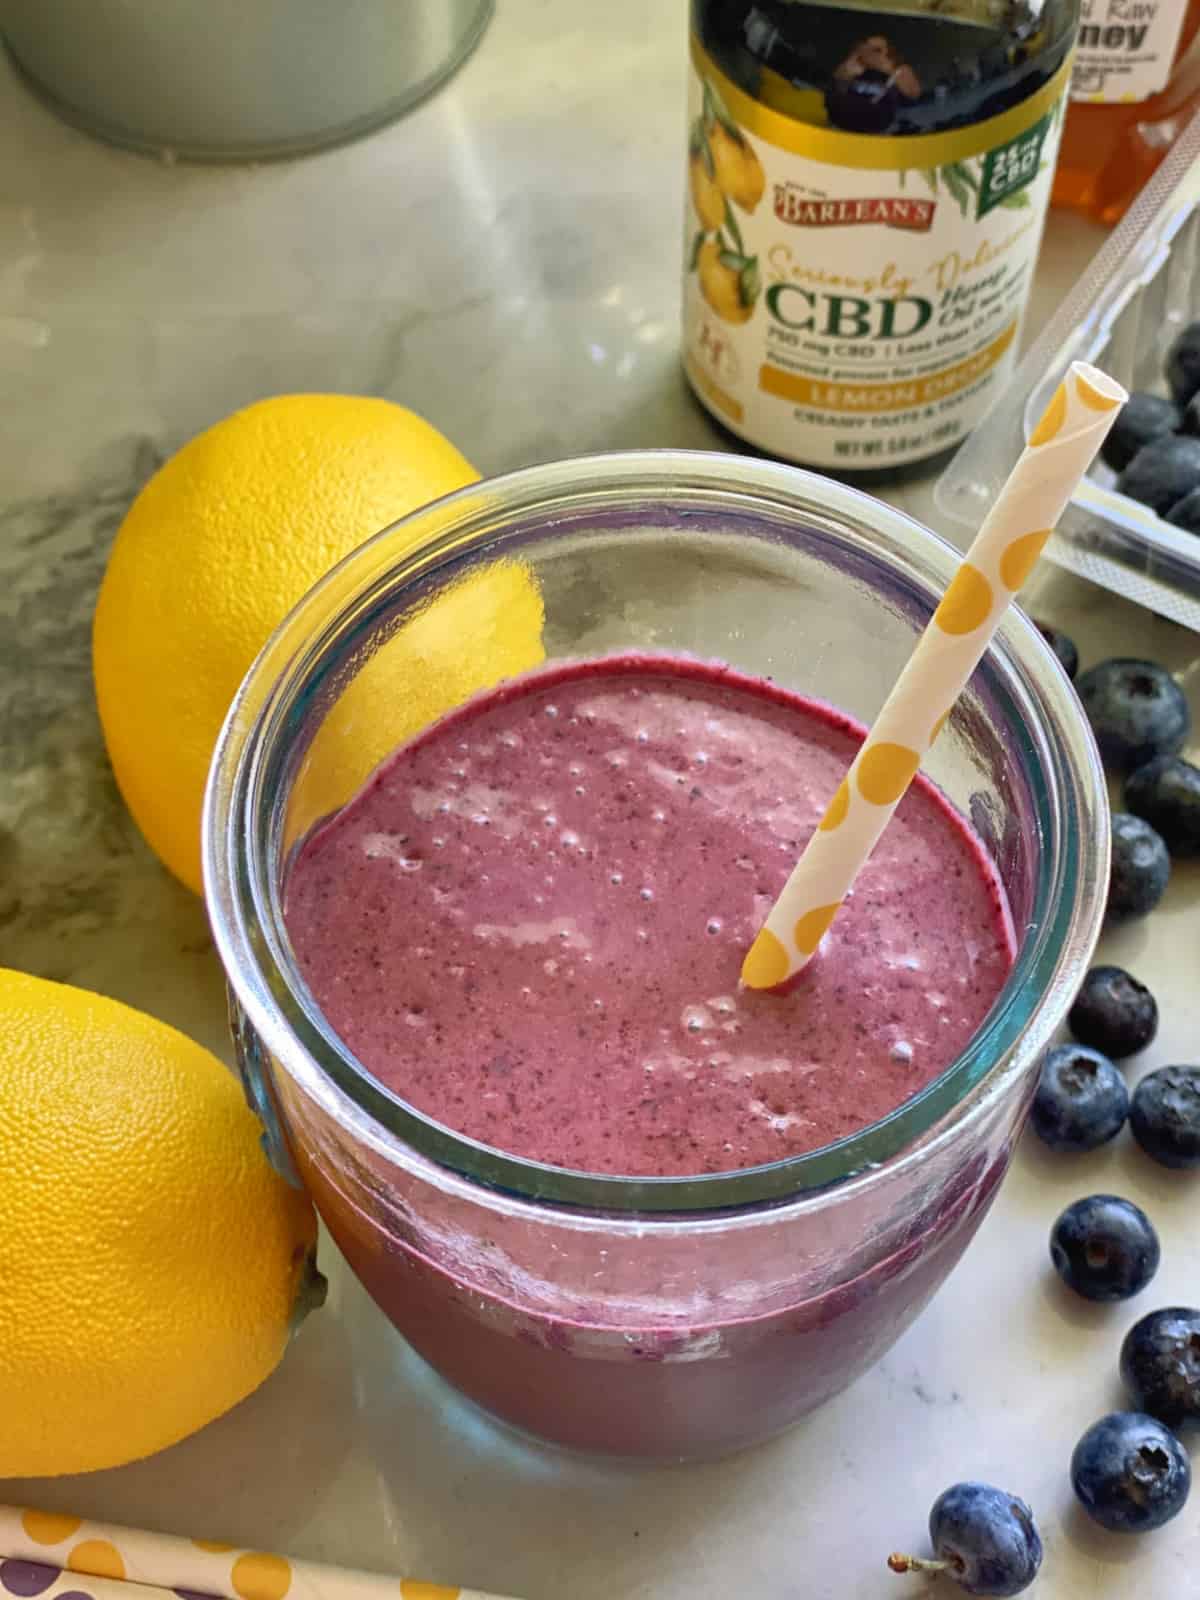 Top view of CBD purple smoothie in glass with paper straw next to blueberries and lemons.